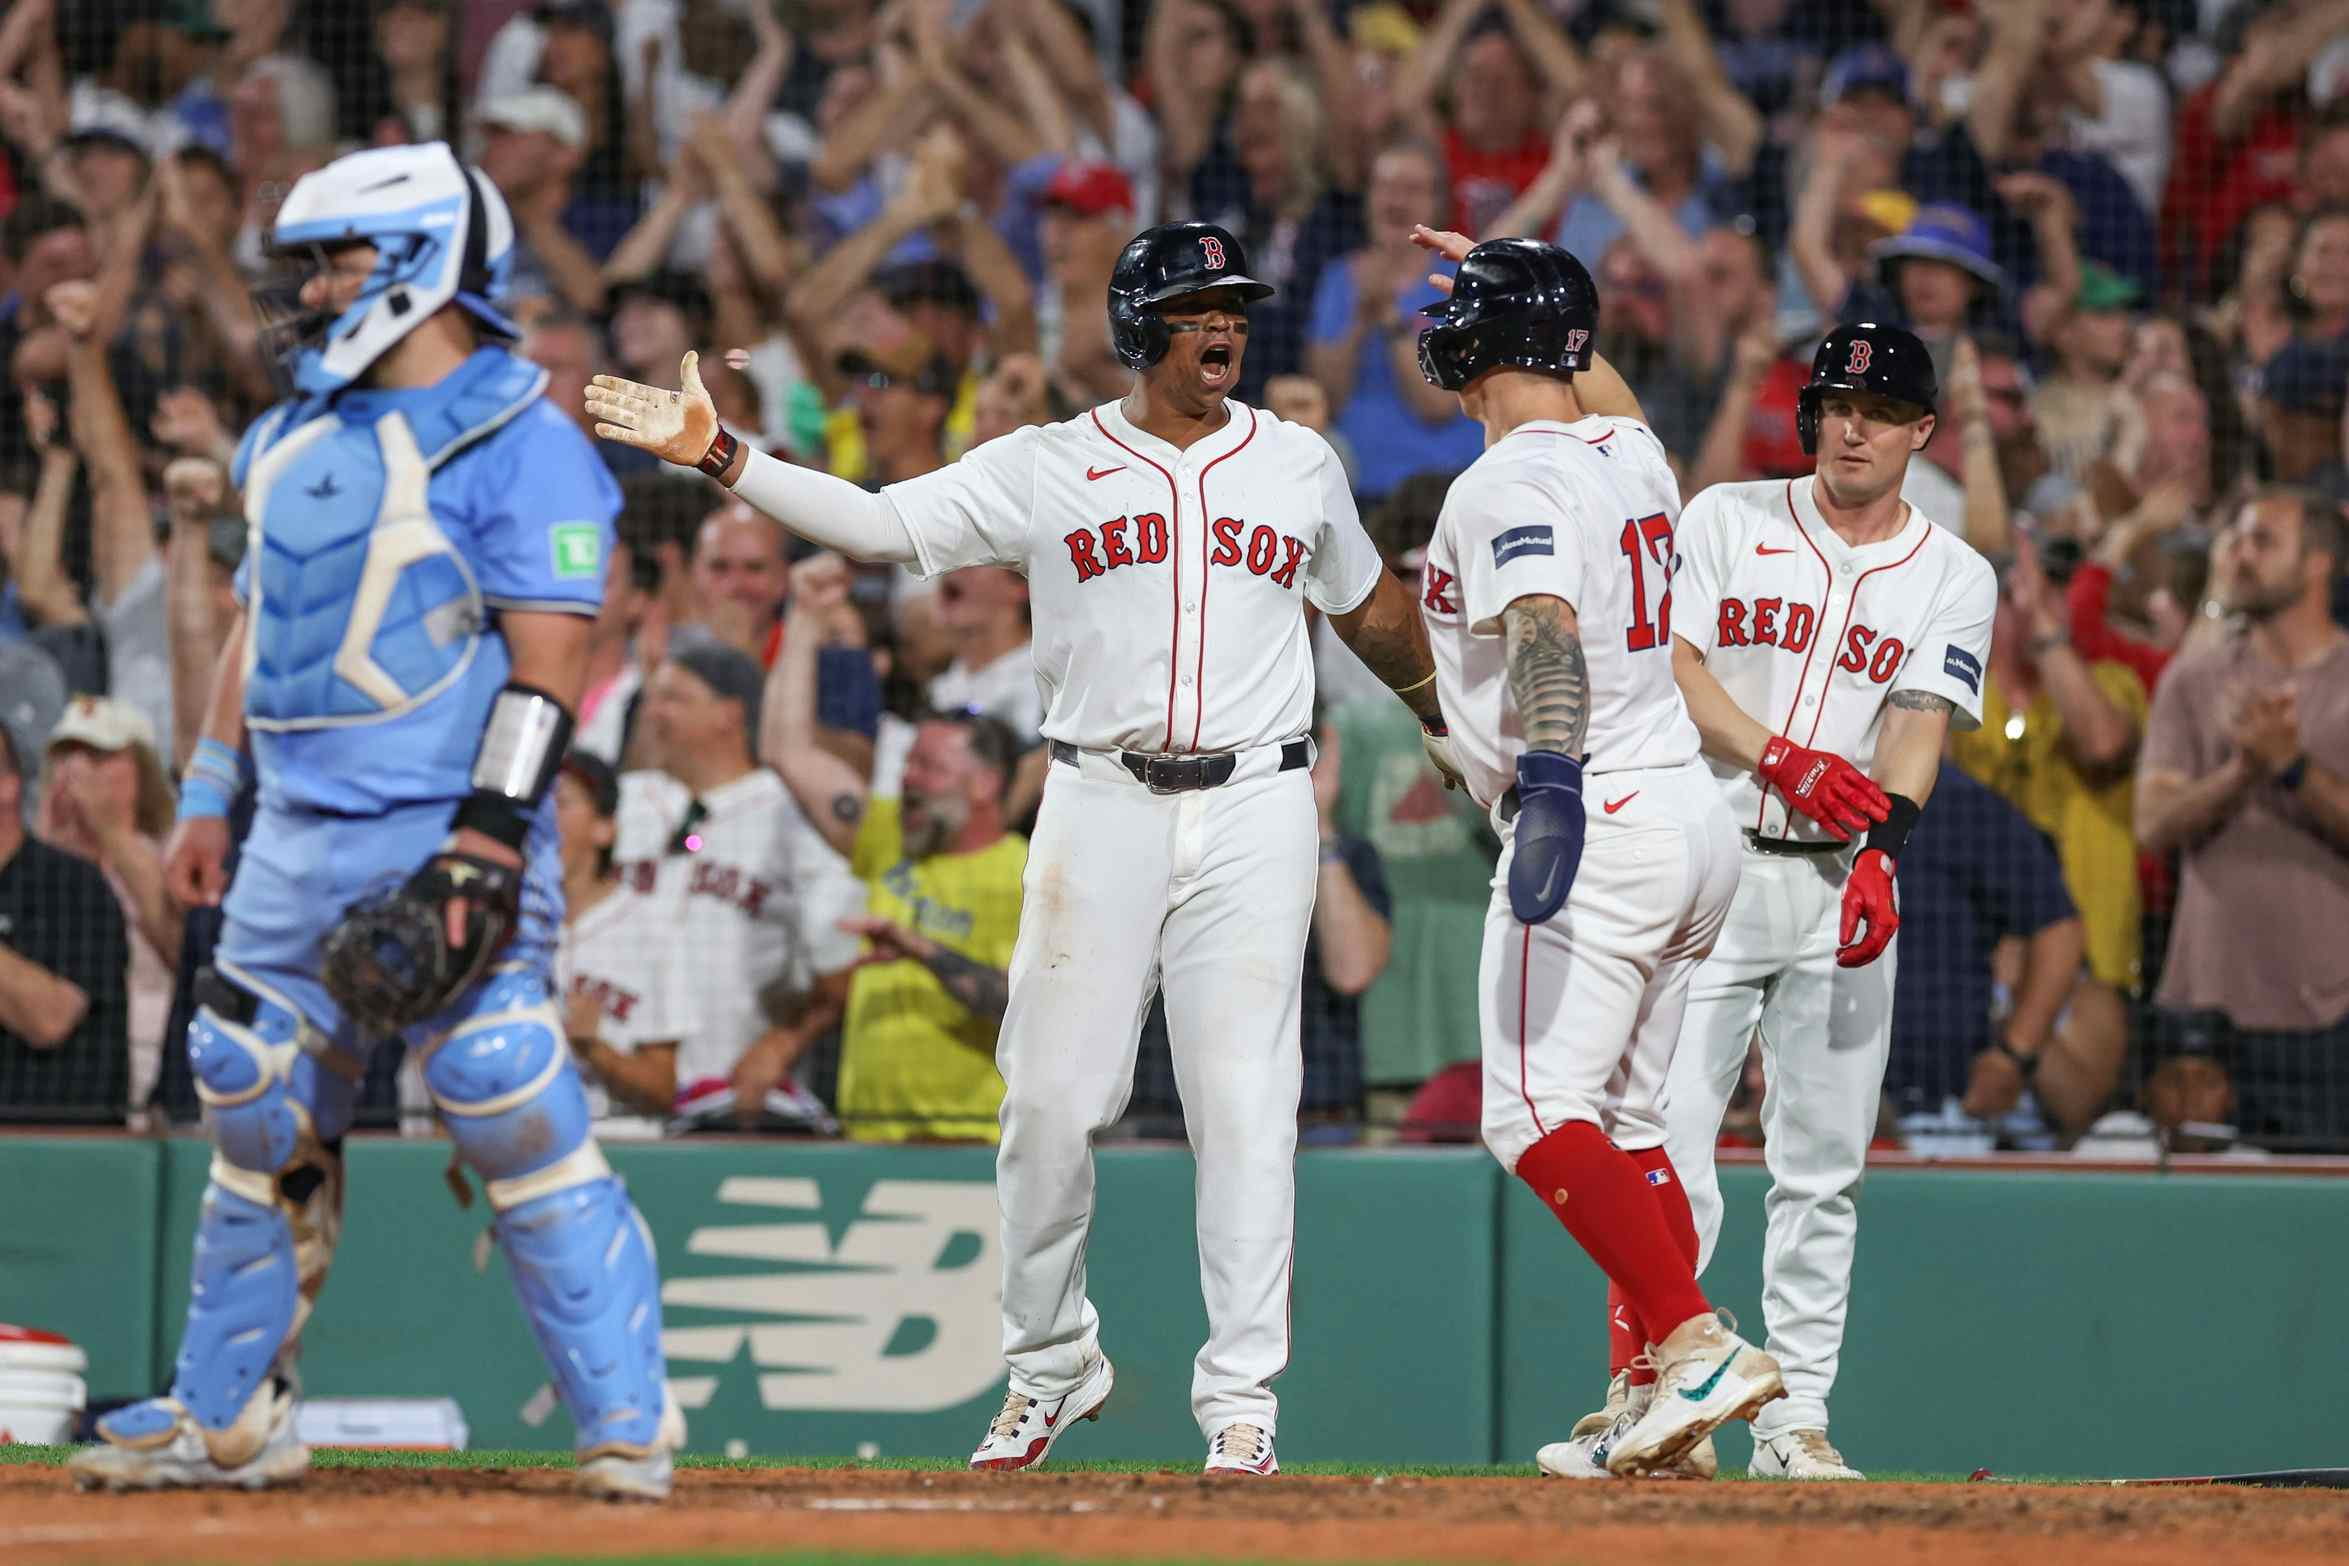 Boston Red Sox third baseman Rafael Devers (11) celebrates with Boston Red Sox right fielder Tyler O'Neill (17) after scoring during the eighth inning against the Toronto Blue Jays at Fenway Park.